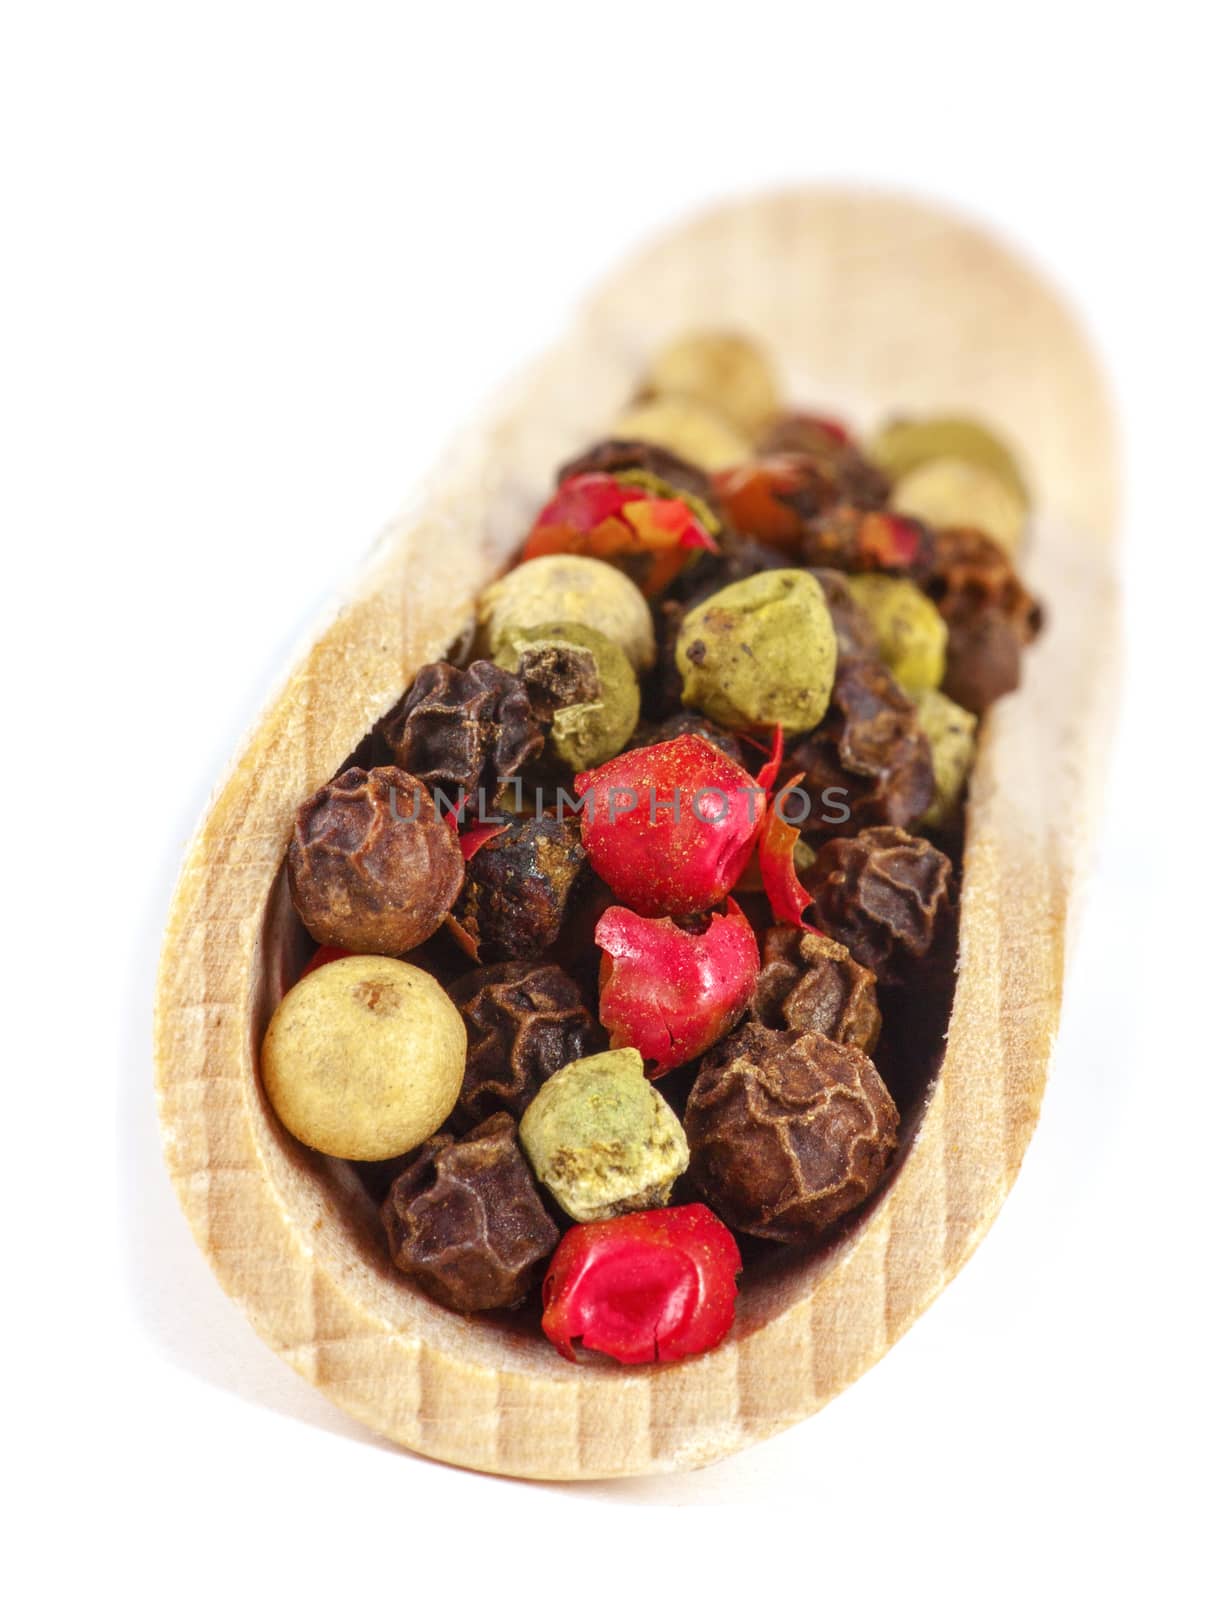 Dried seeds of color pepper on wooden spatula. by red2000